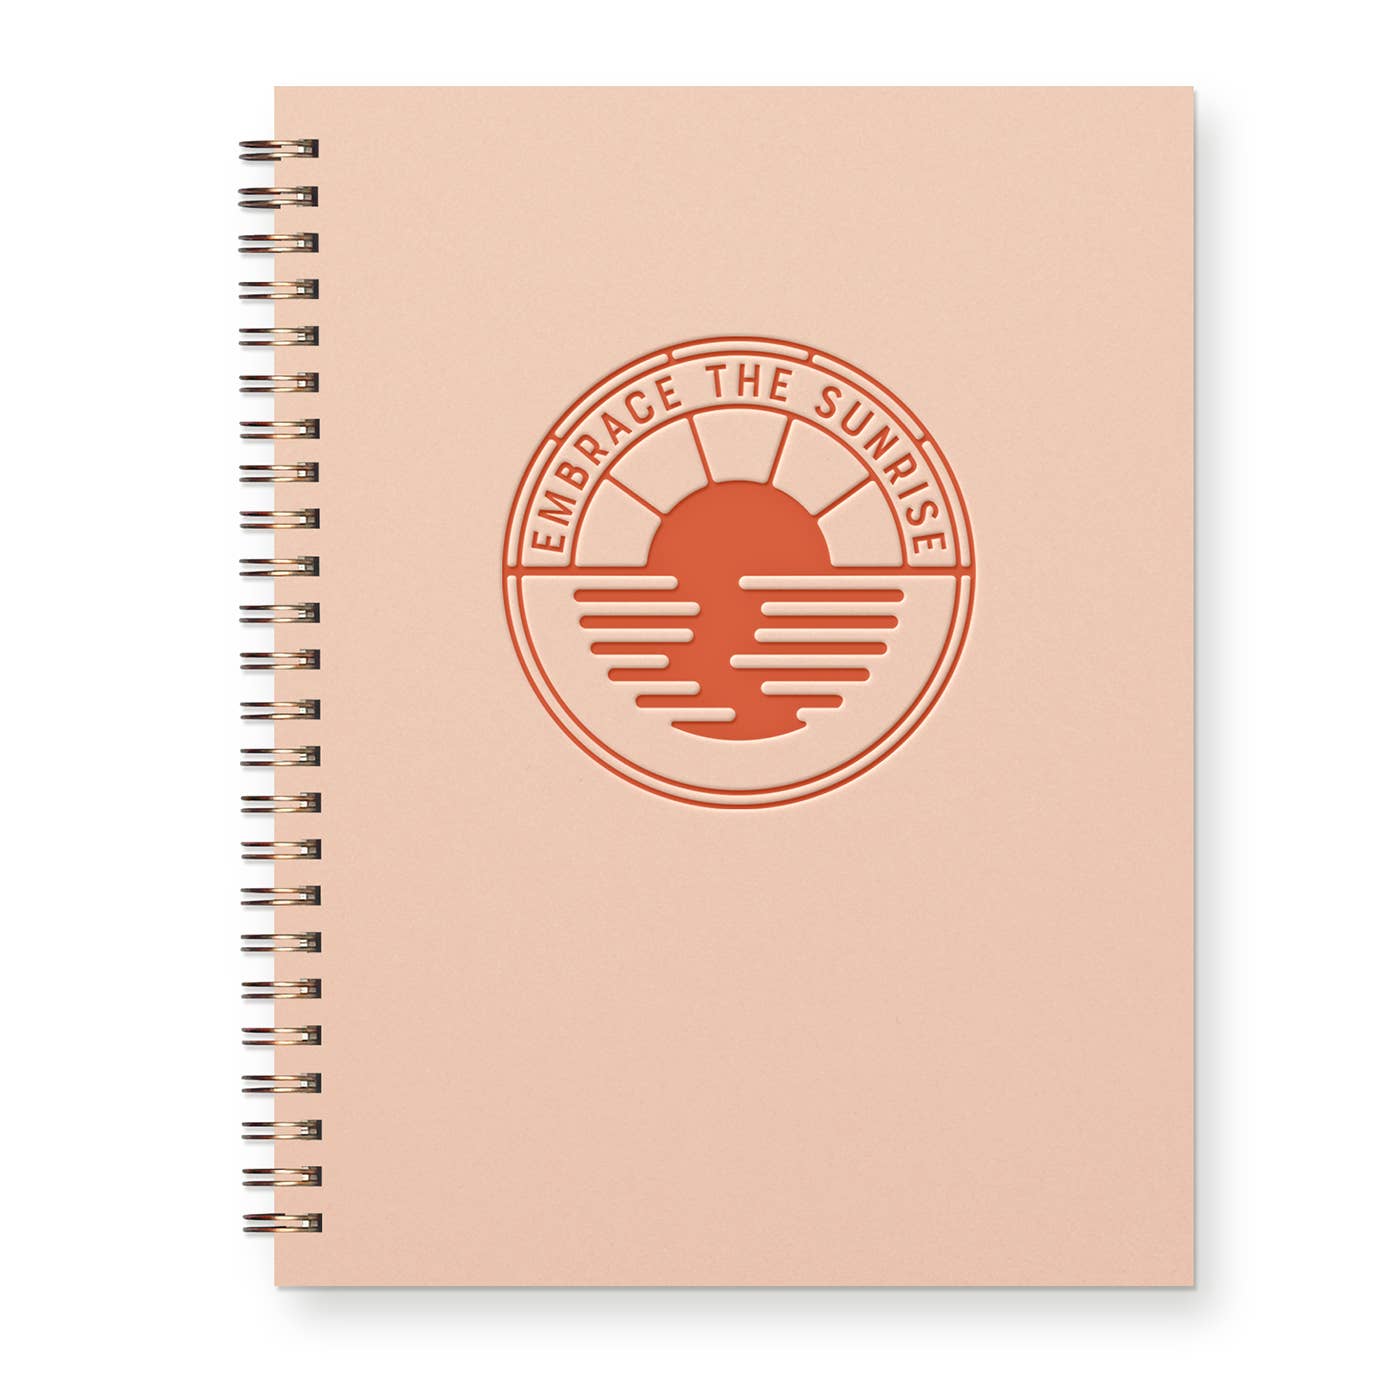 Embrace The Sunrise Blush Journal Lined Notebook